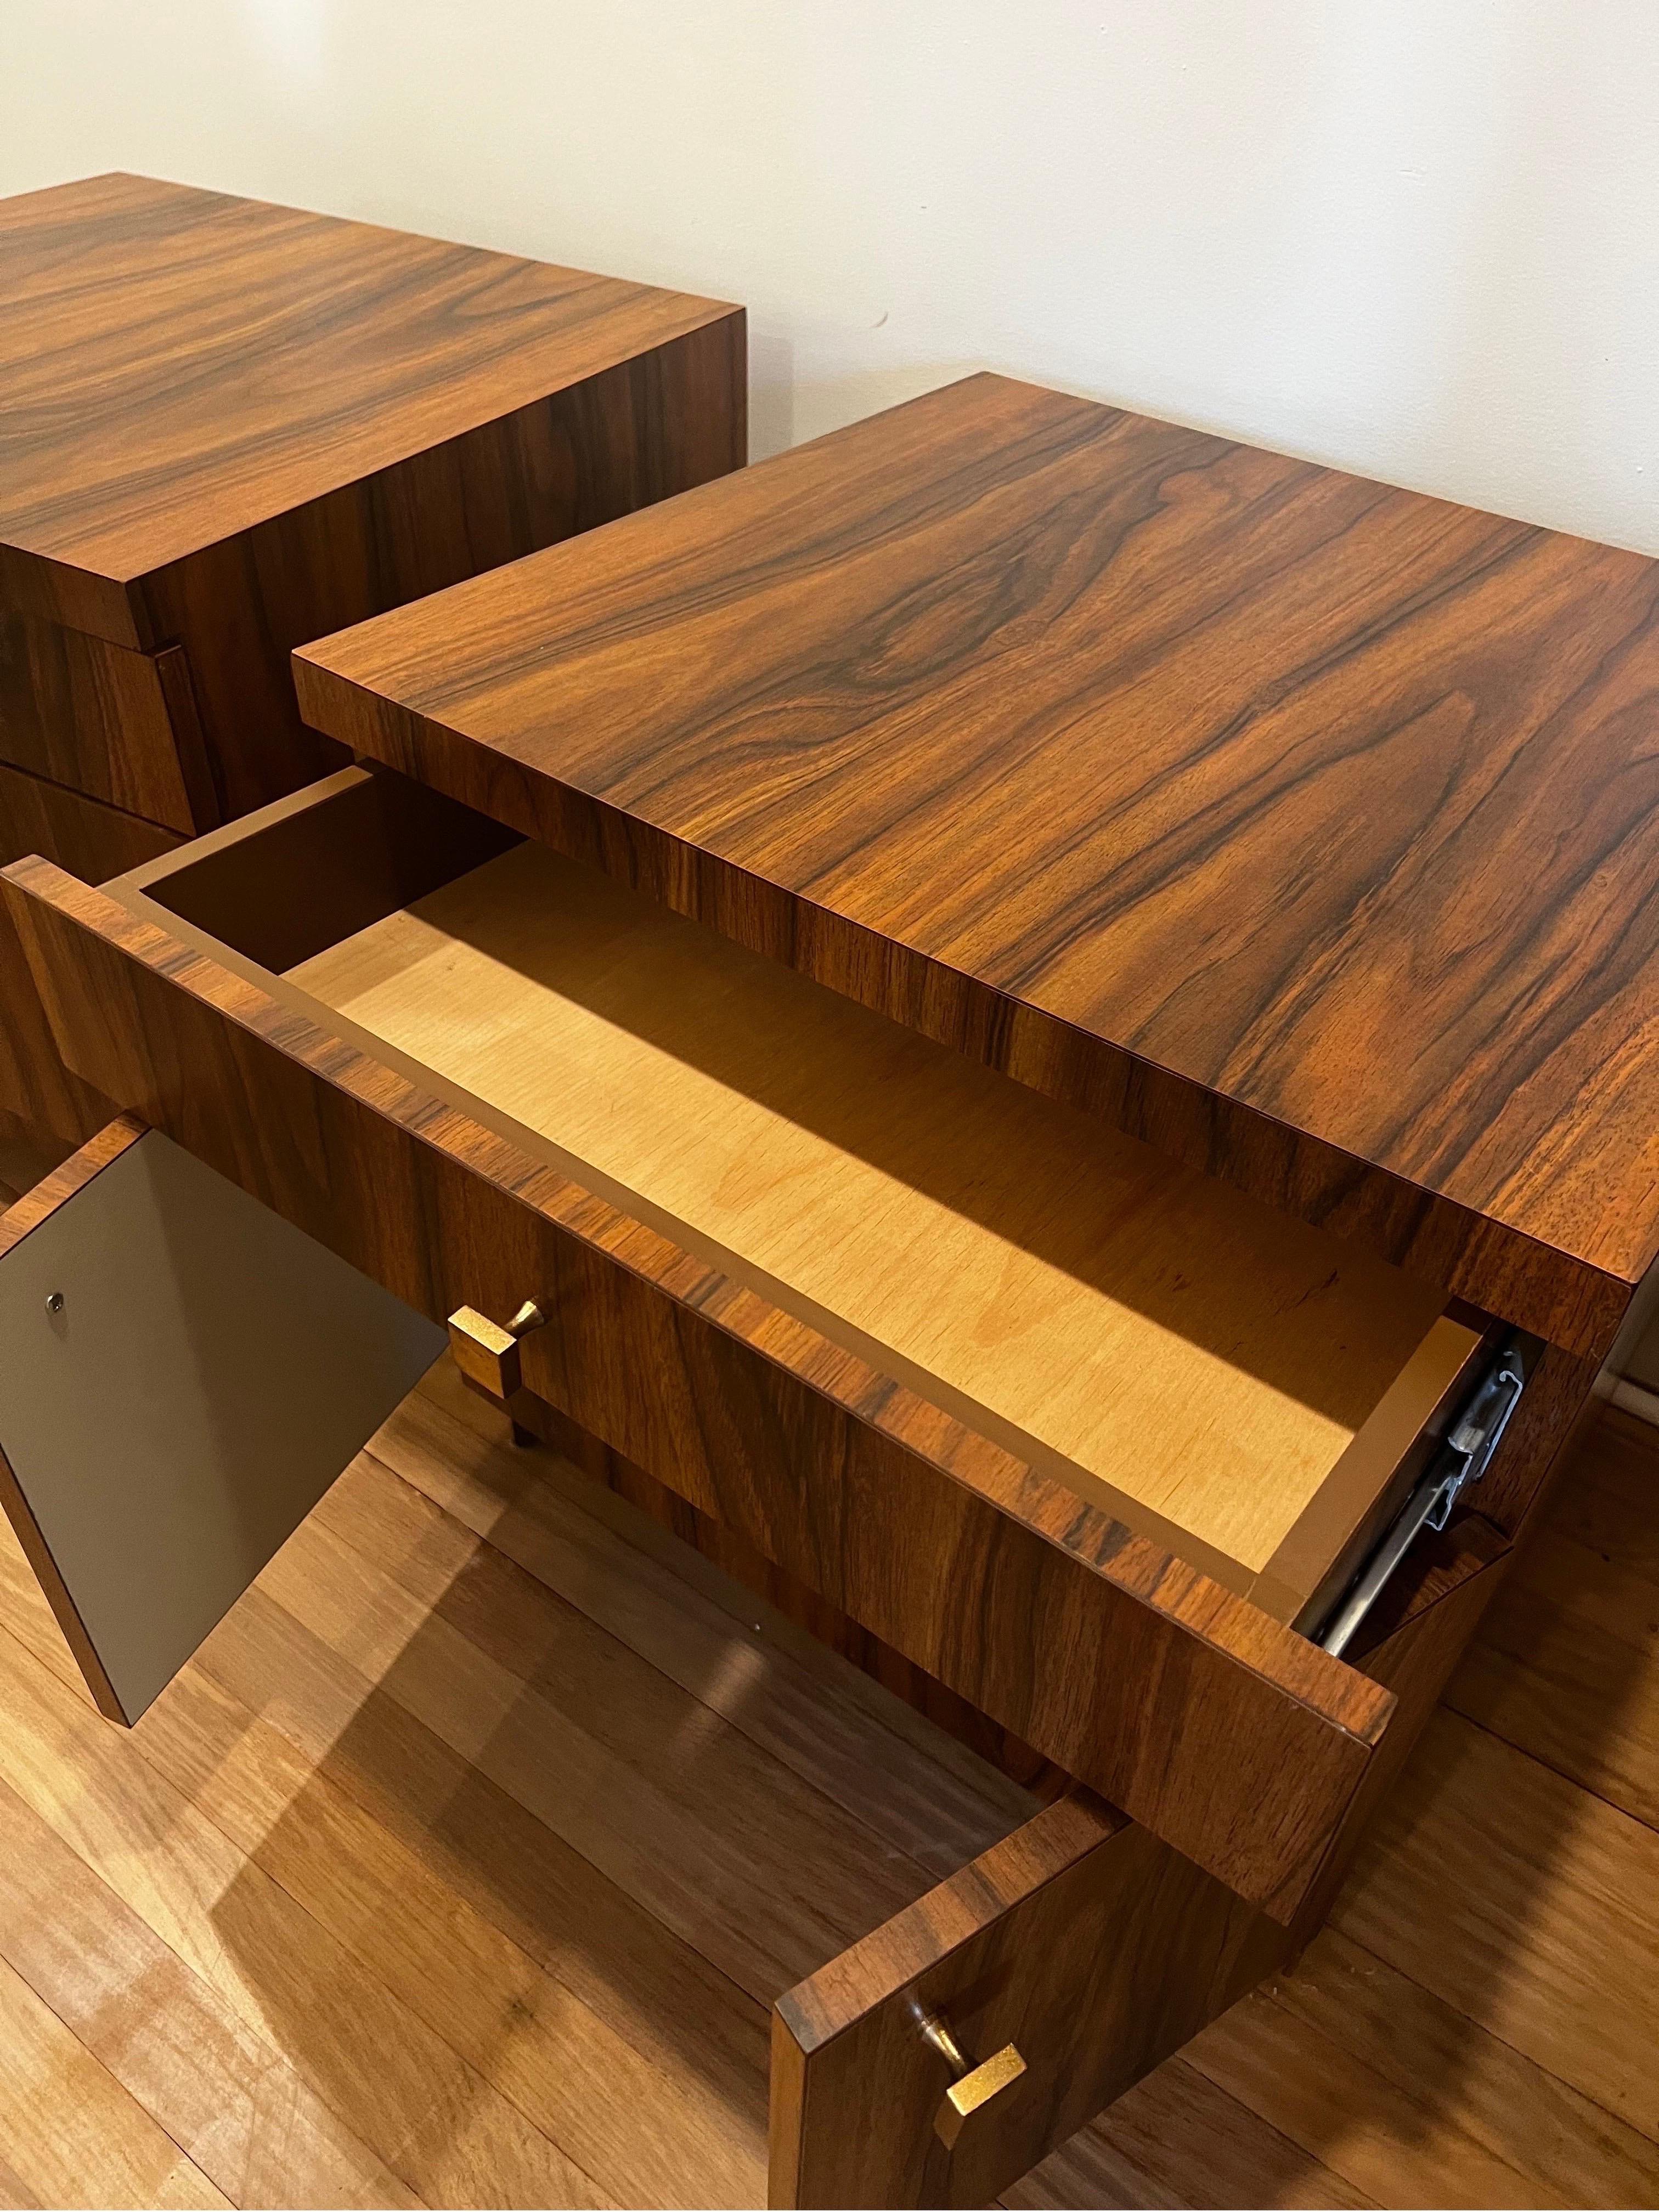 Striking pair of  SOLID cube Mid Century Modern Nightstands.  
Rosewood veneer with laminate lining.  The finish is wrapped all the way around so they can float in room and look good from all angles.  
Has single drawer with two doors offering lots